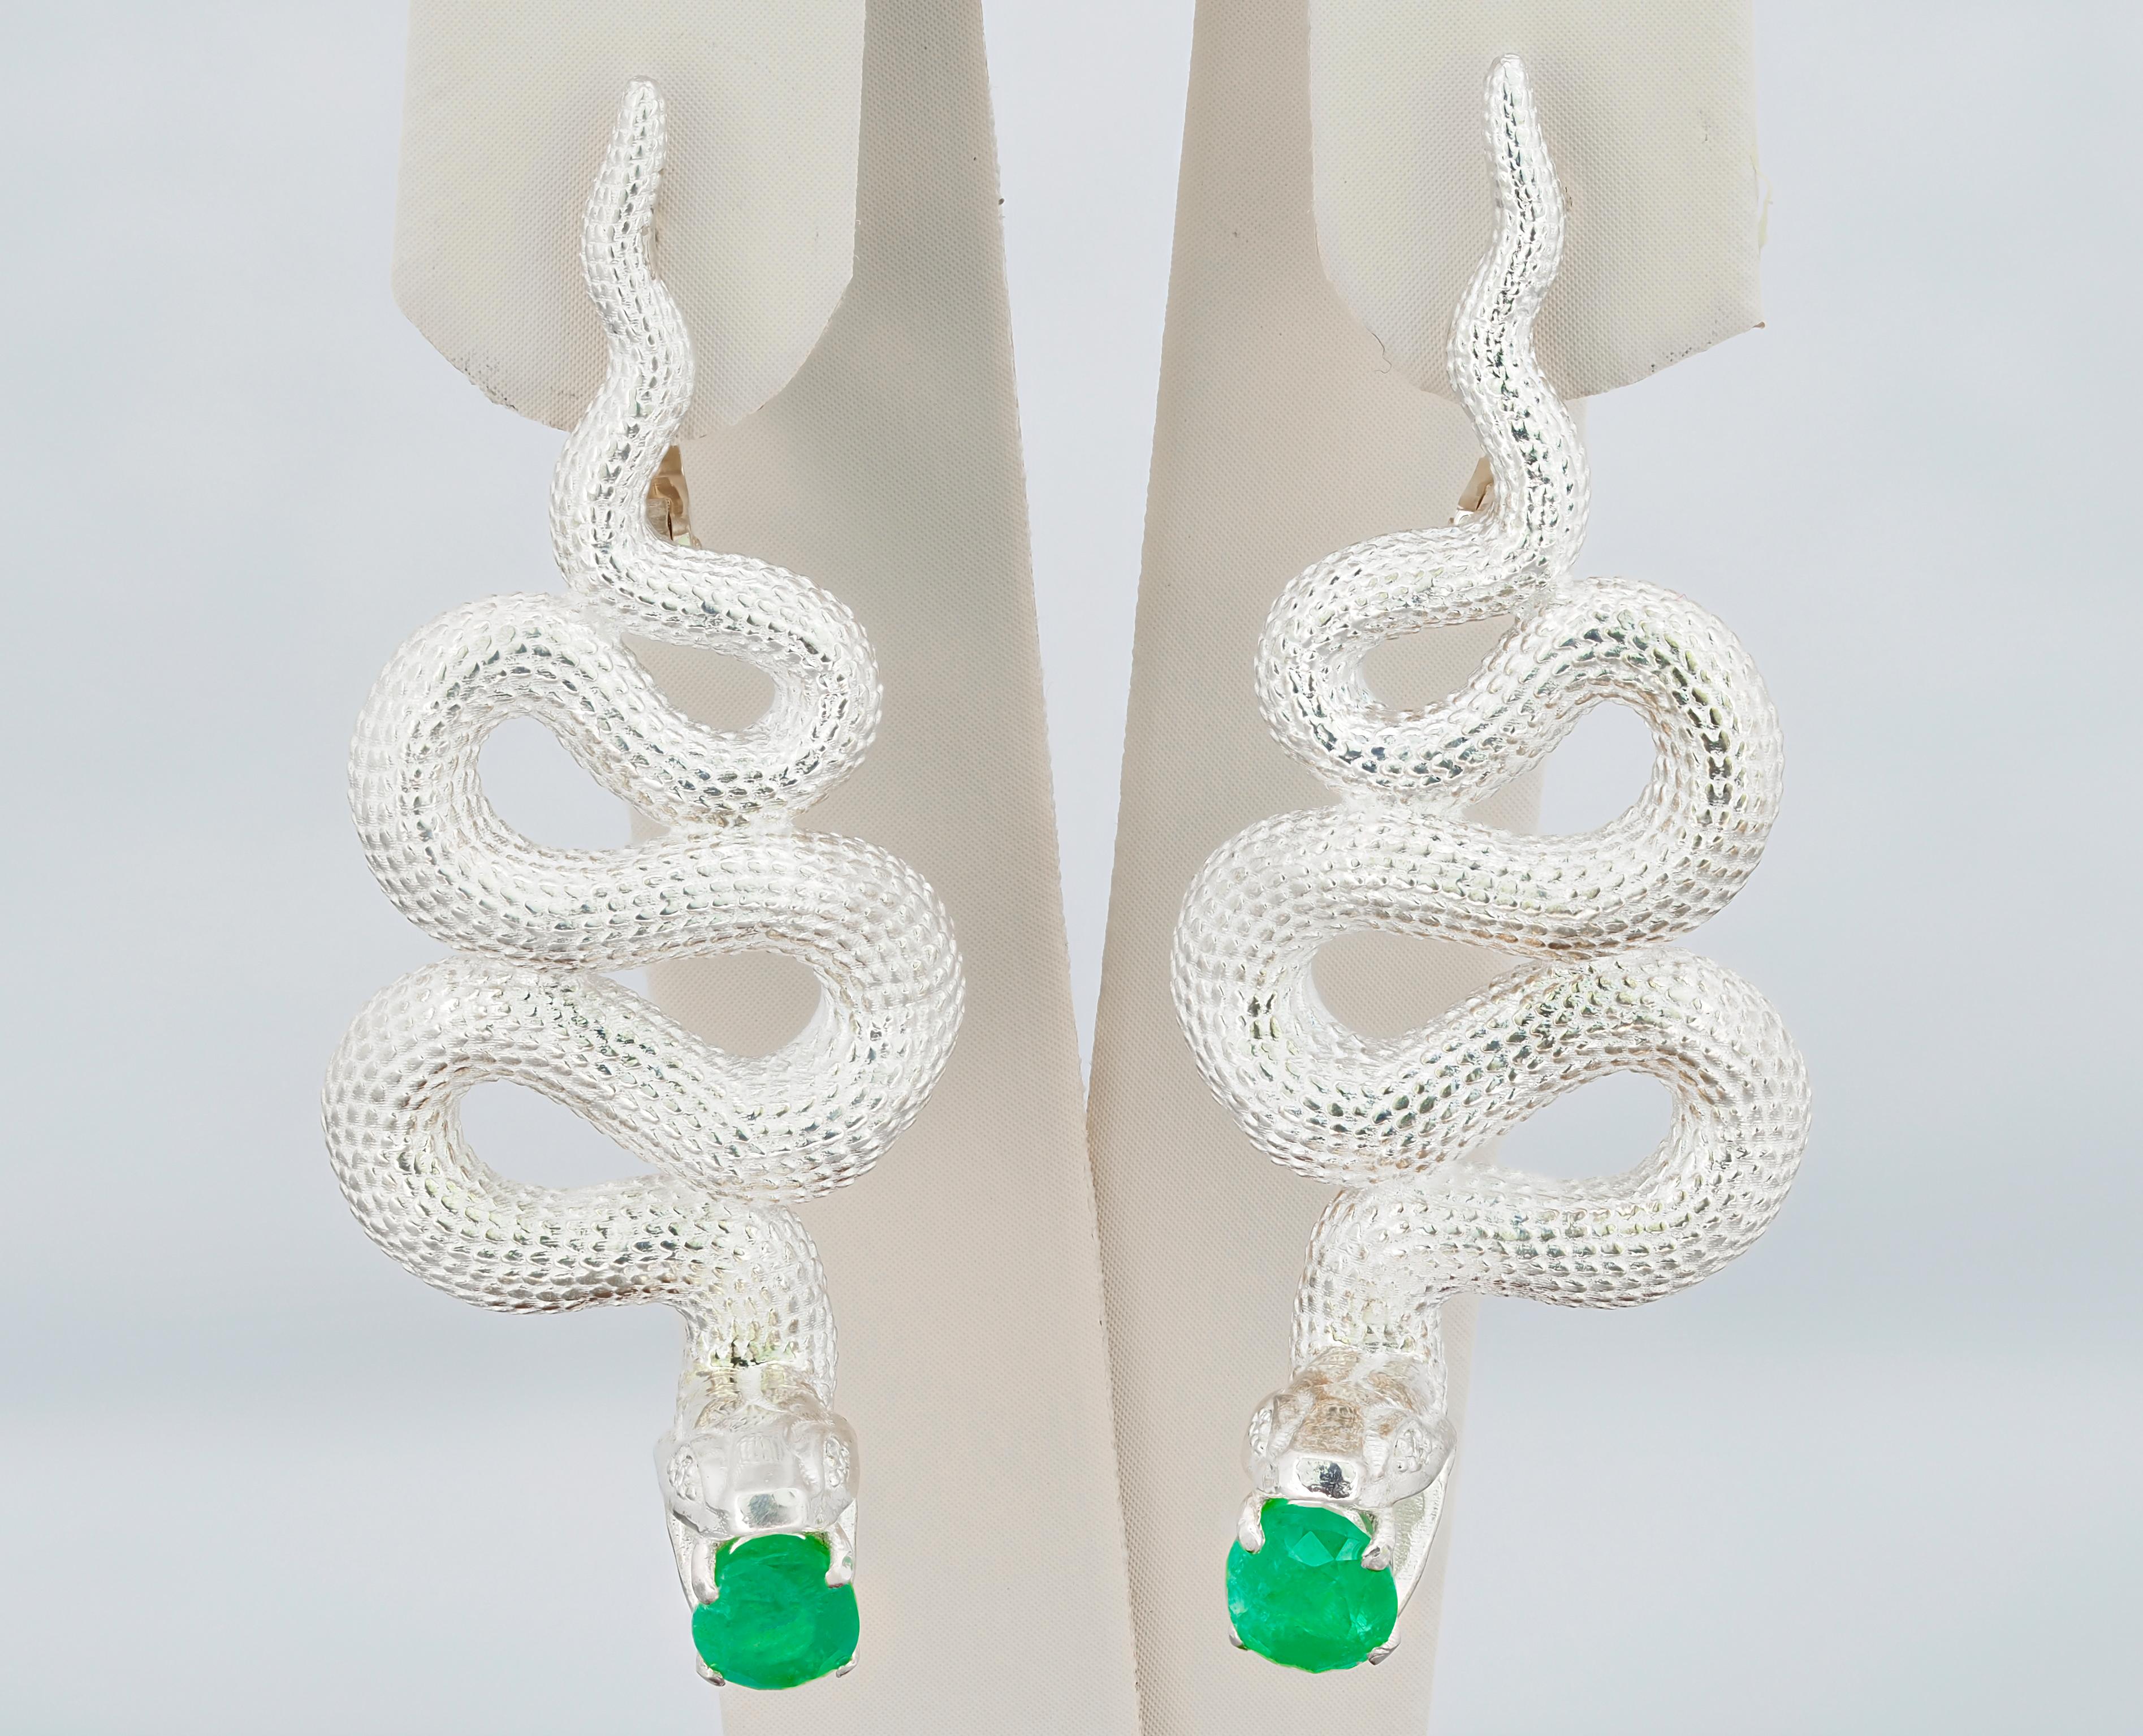 Oval Cut Emerald earrings. Massive Snake Earrings with Emeralds and Diamonds For Sale